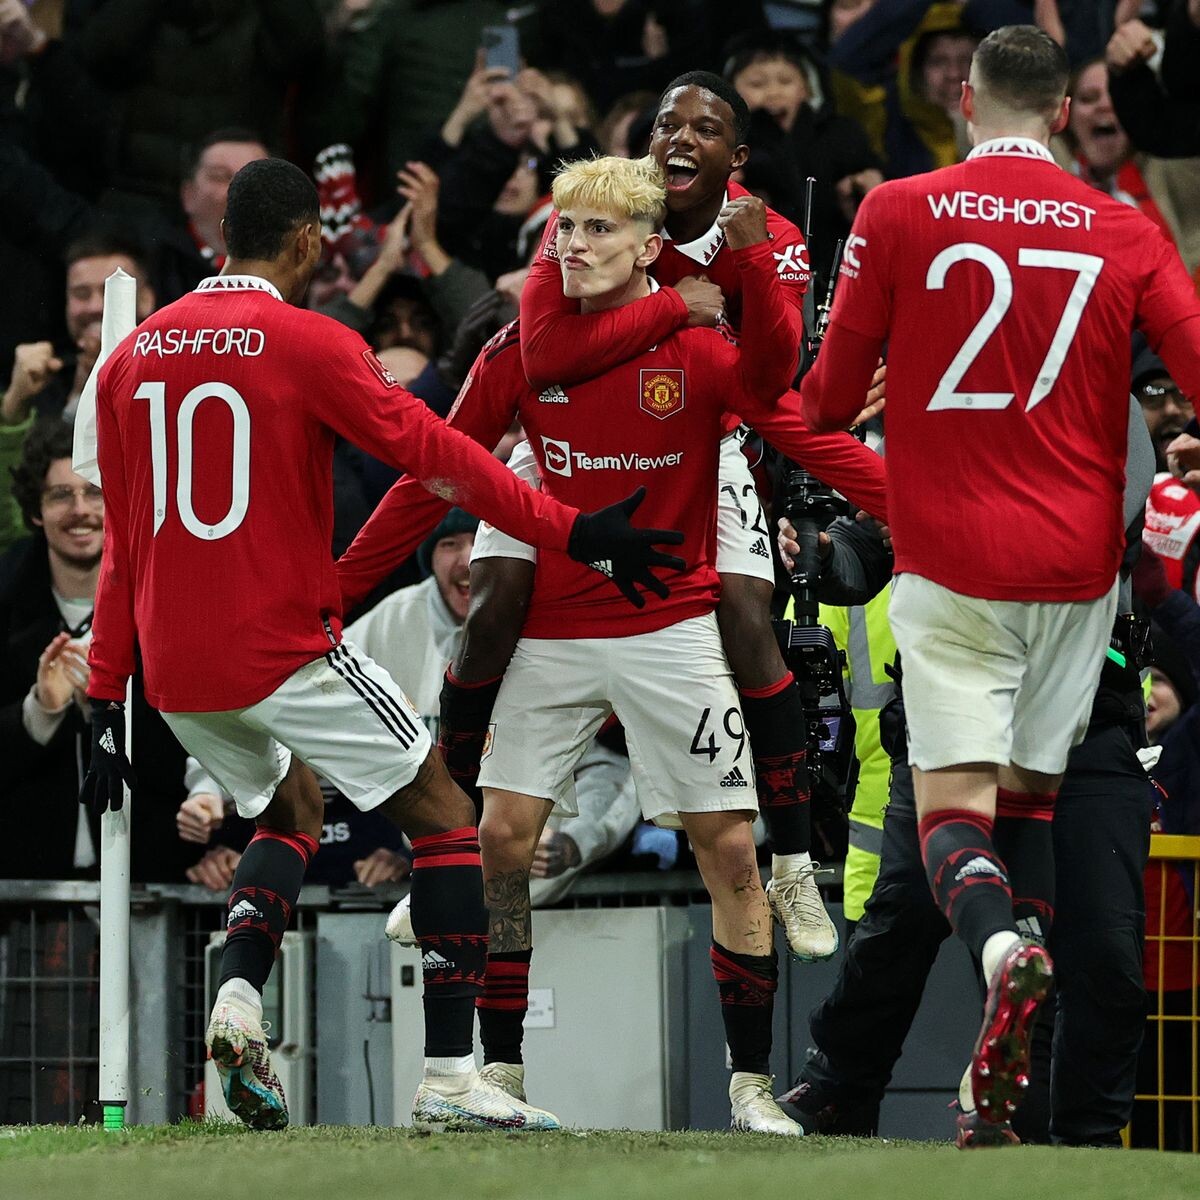 Completing a domestic double: Can Man United pull it off?